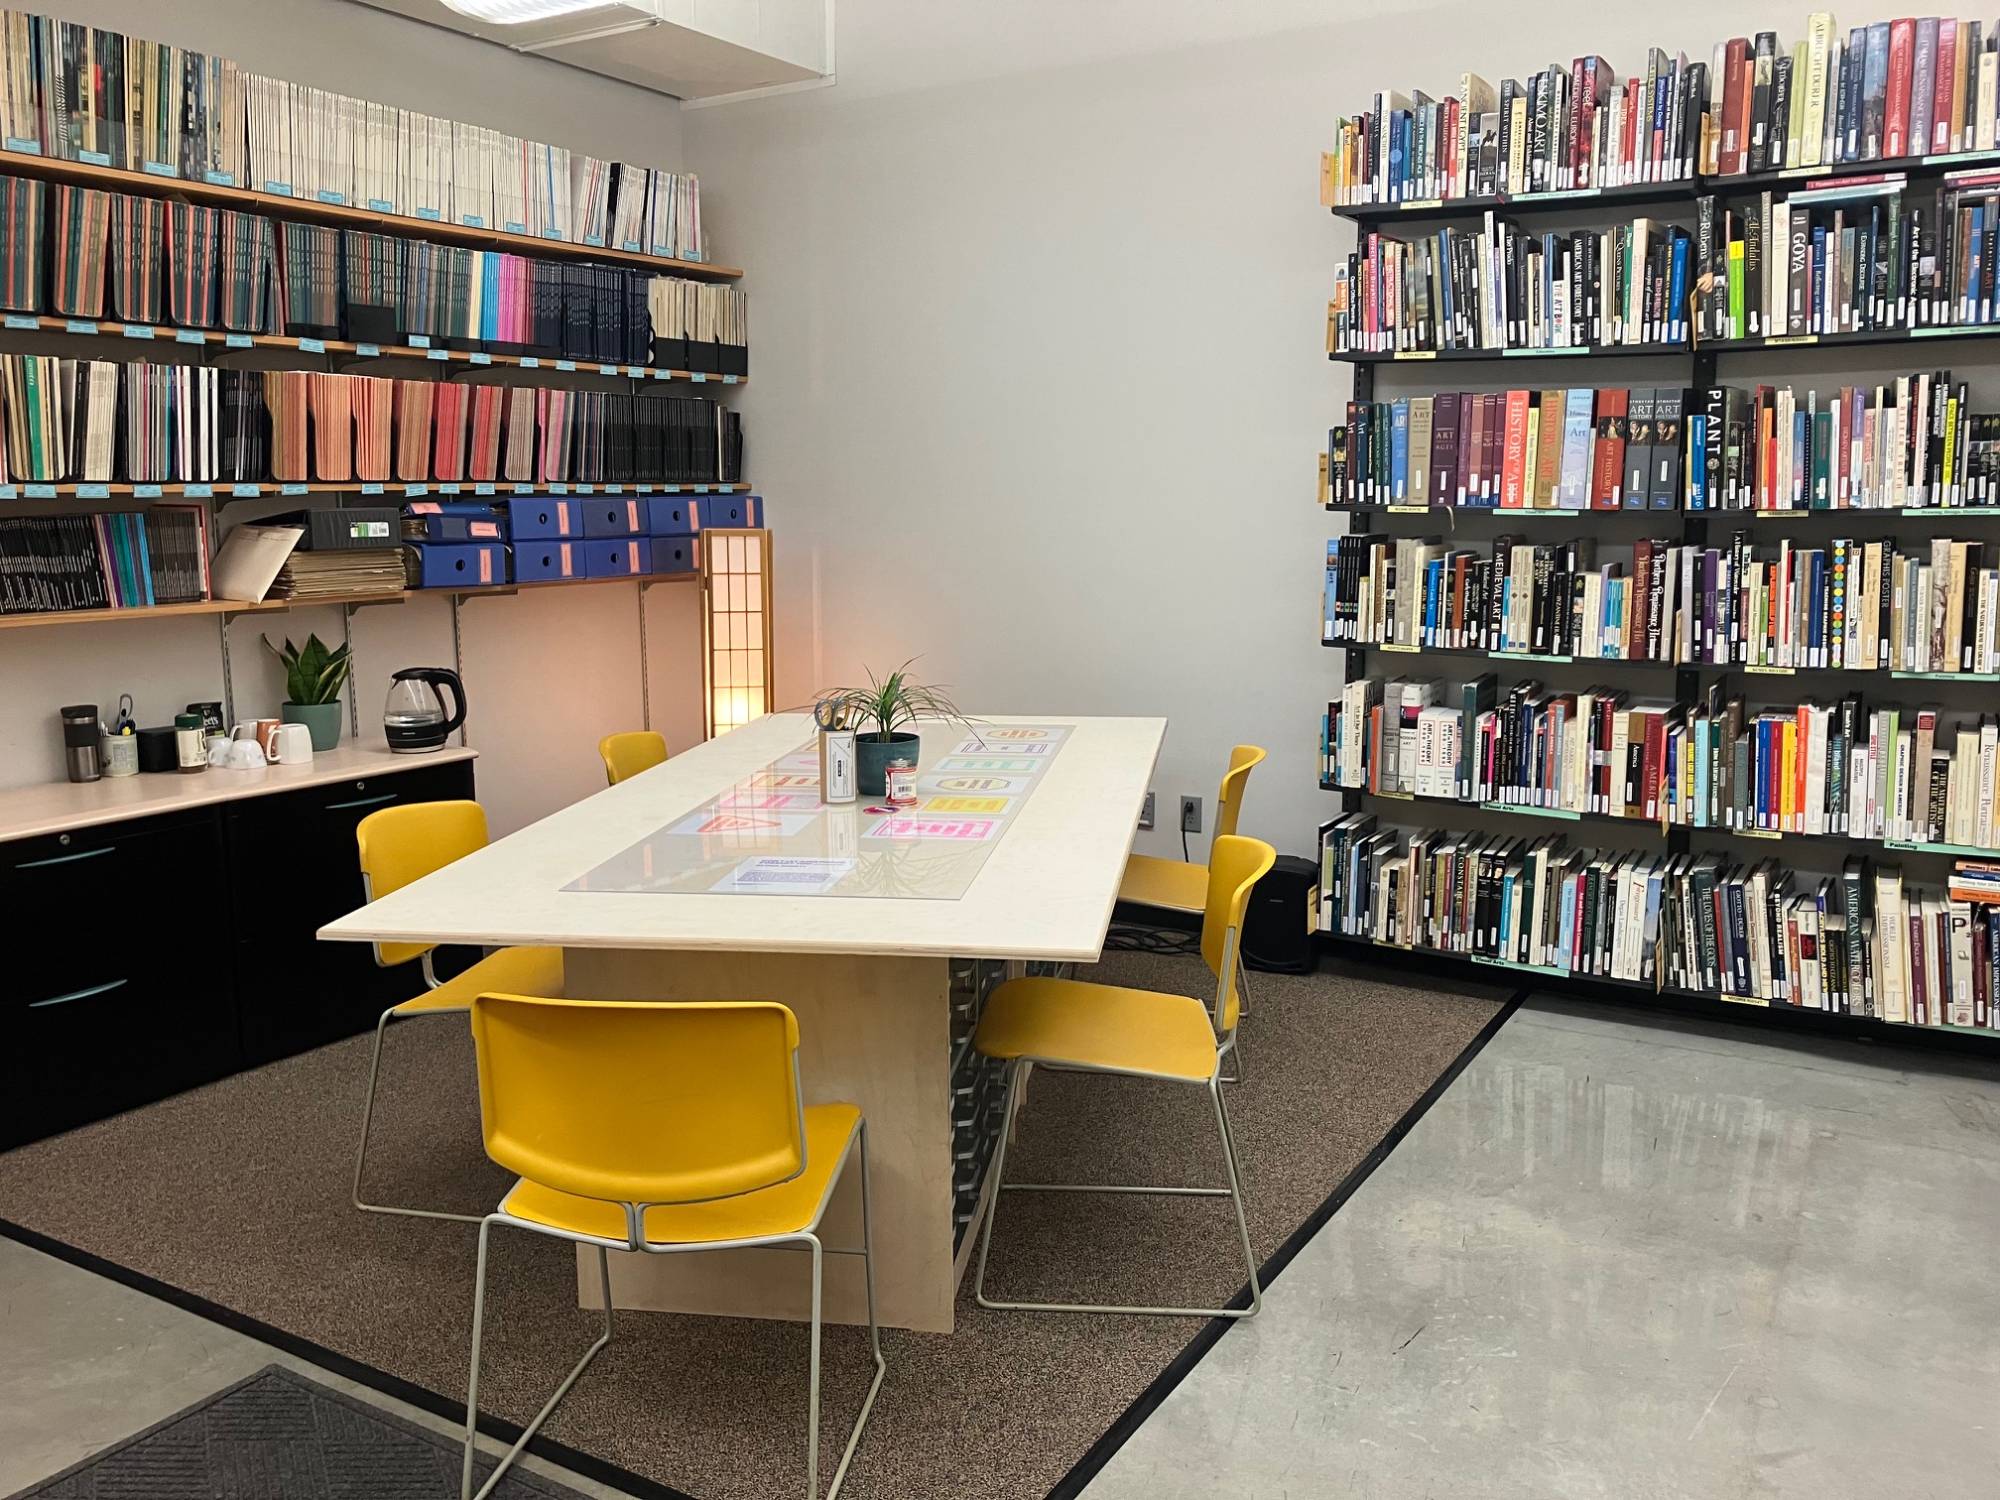 image of the VRC worktable area surrounded by books and with colorful prints on the table